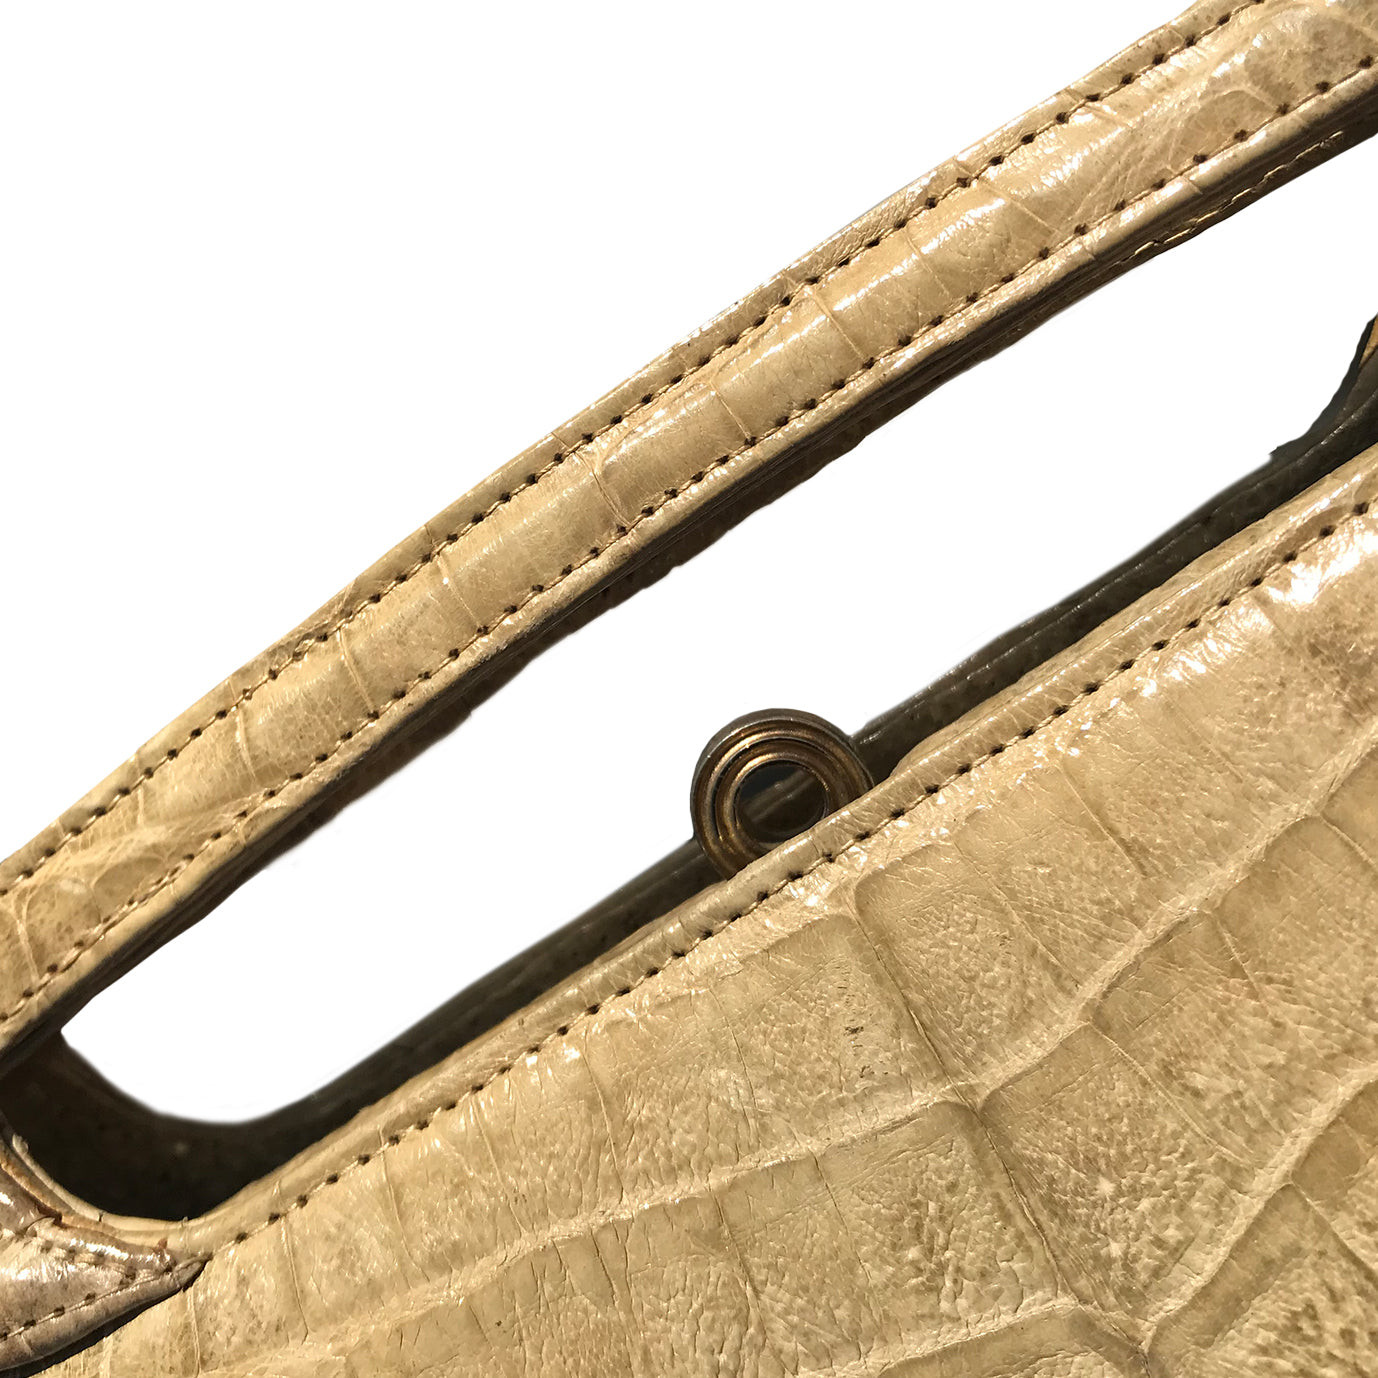 Vintage Cream Croc Handbag. Find this and other Beautiful Vintage Bags & Purses for sale at Intovintage.co.uk.